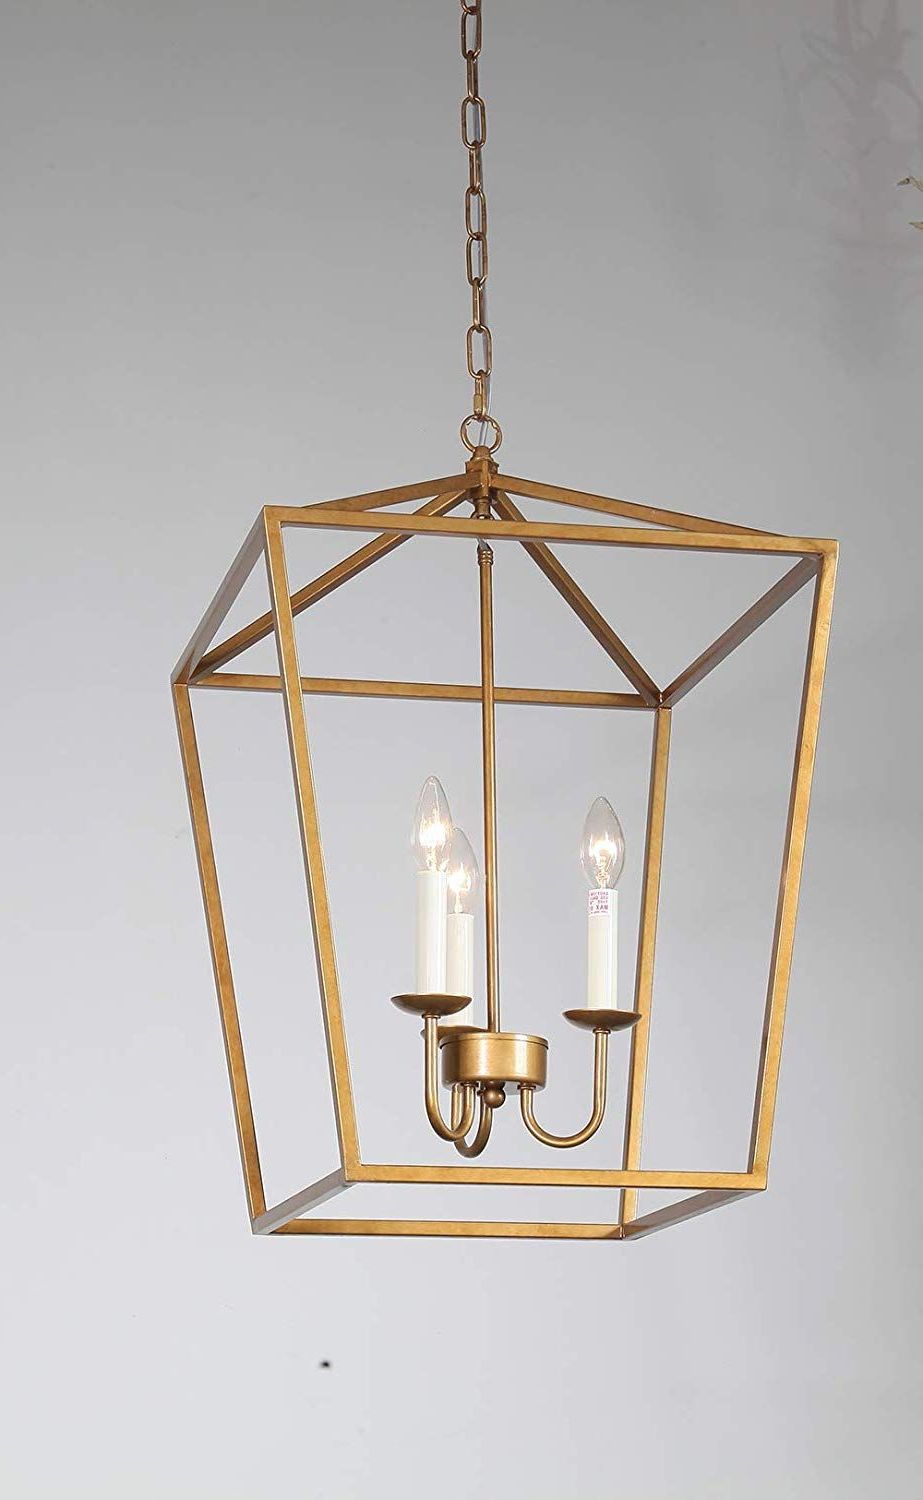 Recent Brass Lantern Chandeliers With Foyer Lantern Pendant Light Fixture, Dst Gold Iron Cage Chandelier  Industrial Led Ceiling Lighting, Size: D17'' H25'' Chain 45'' (View 1 of 15)